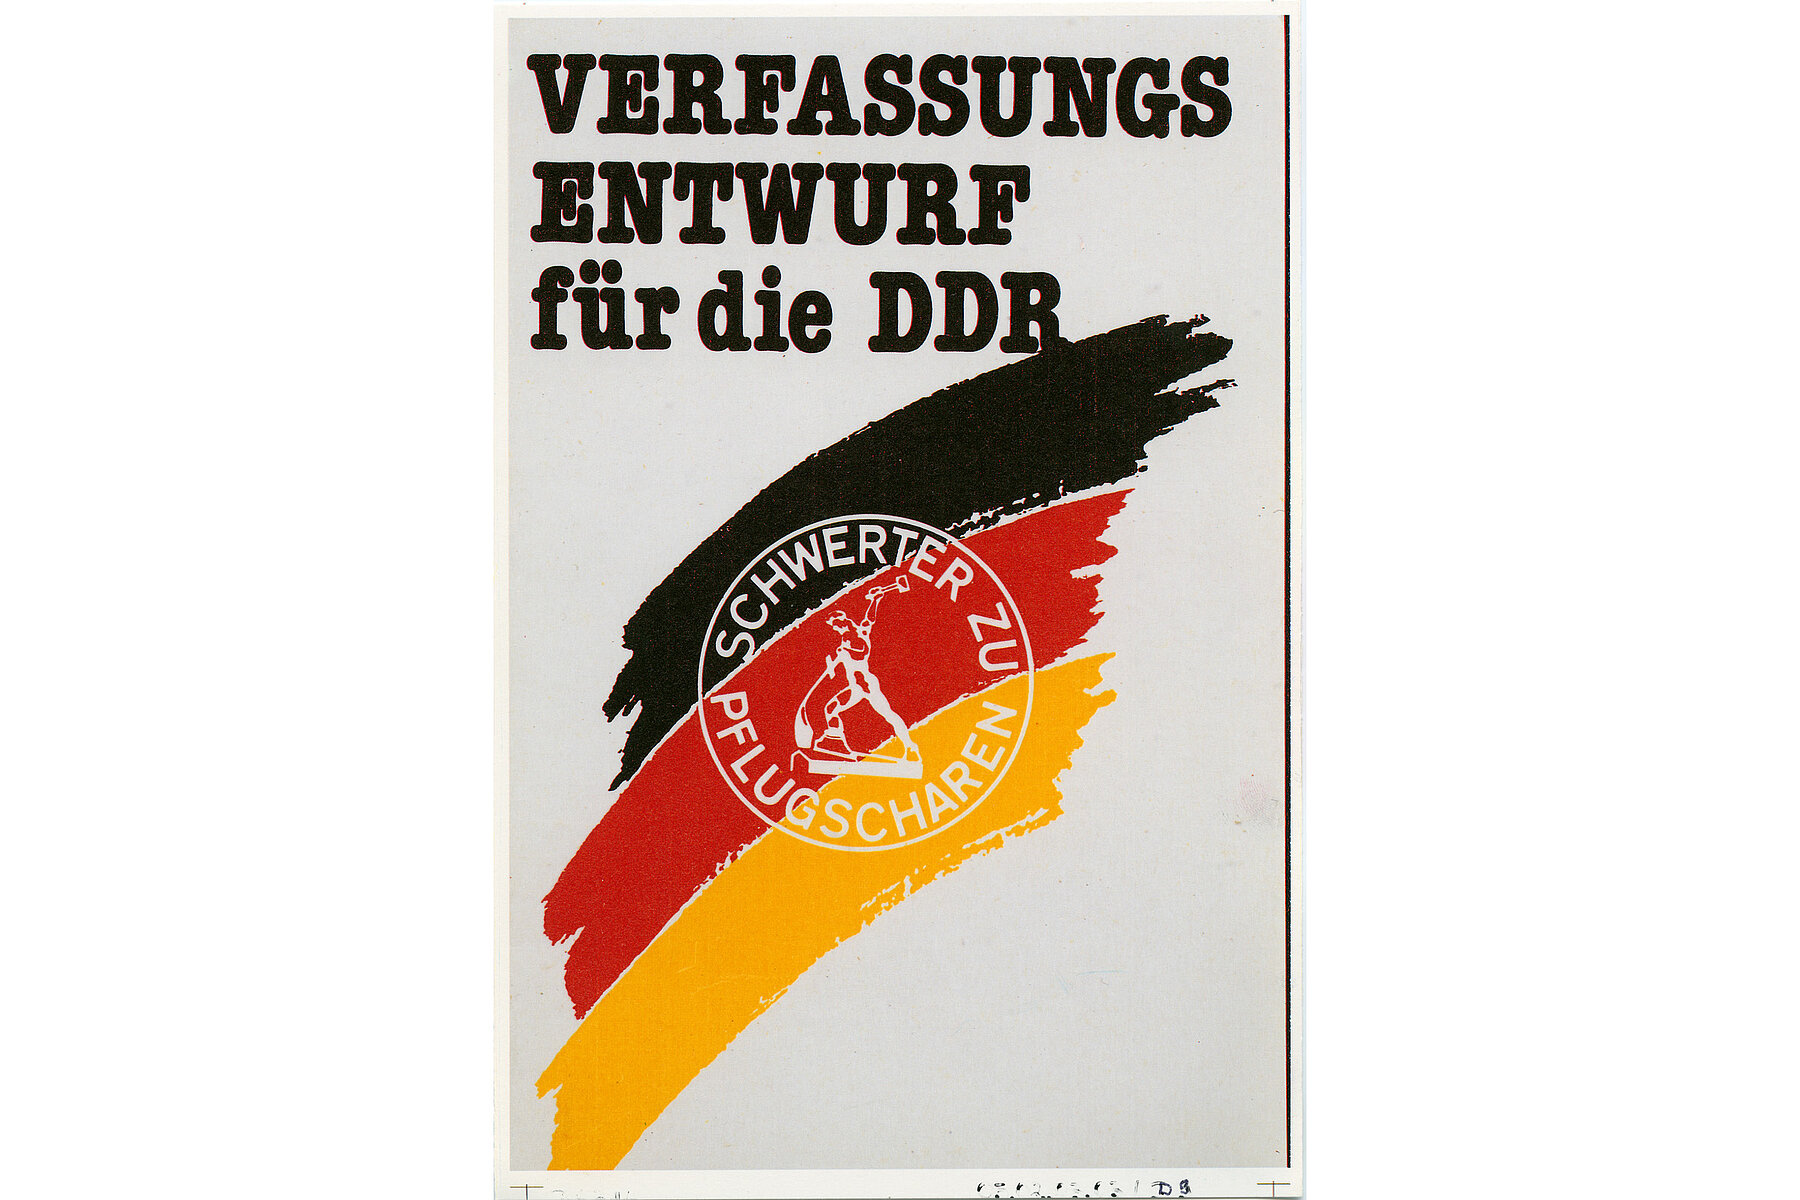 The draft constitution for the GDR: The colours black-red-gold are shown in brushstrokes on the front. These are covered by the logo of "Swords to Ploughshares", with a muscular figure forging a sword into a plough.